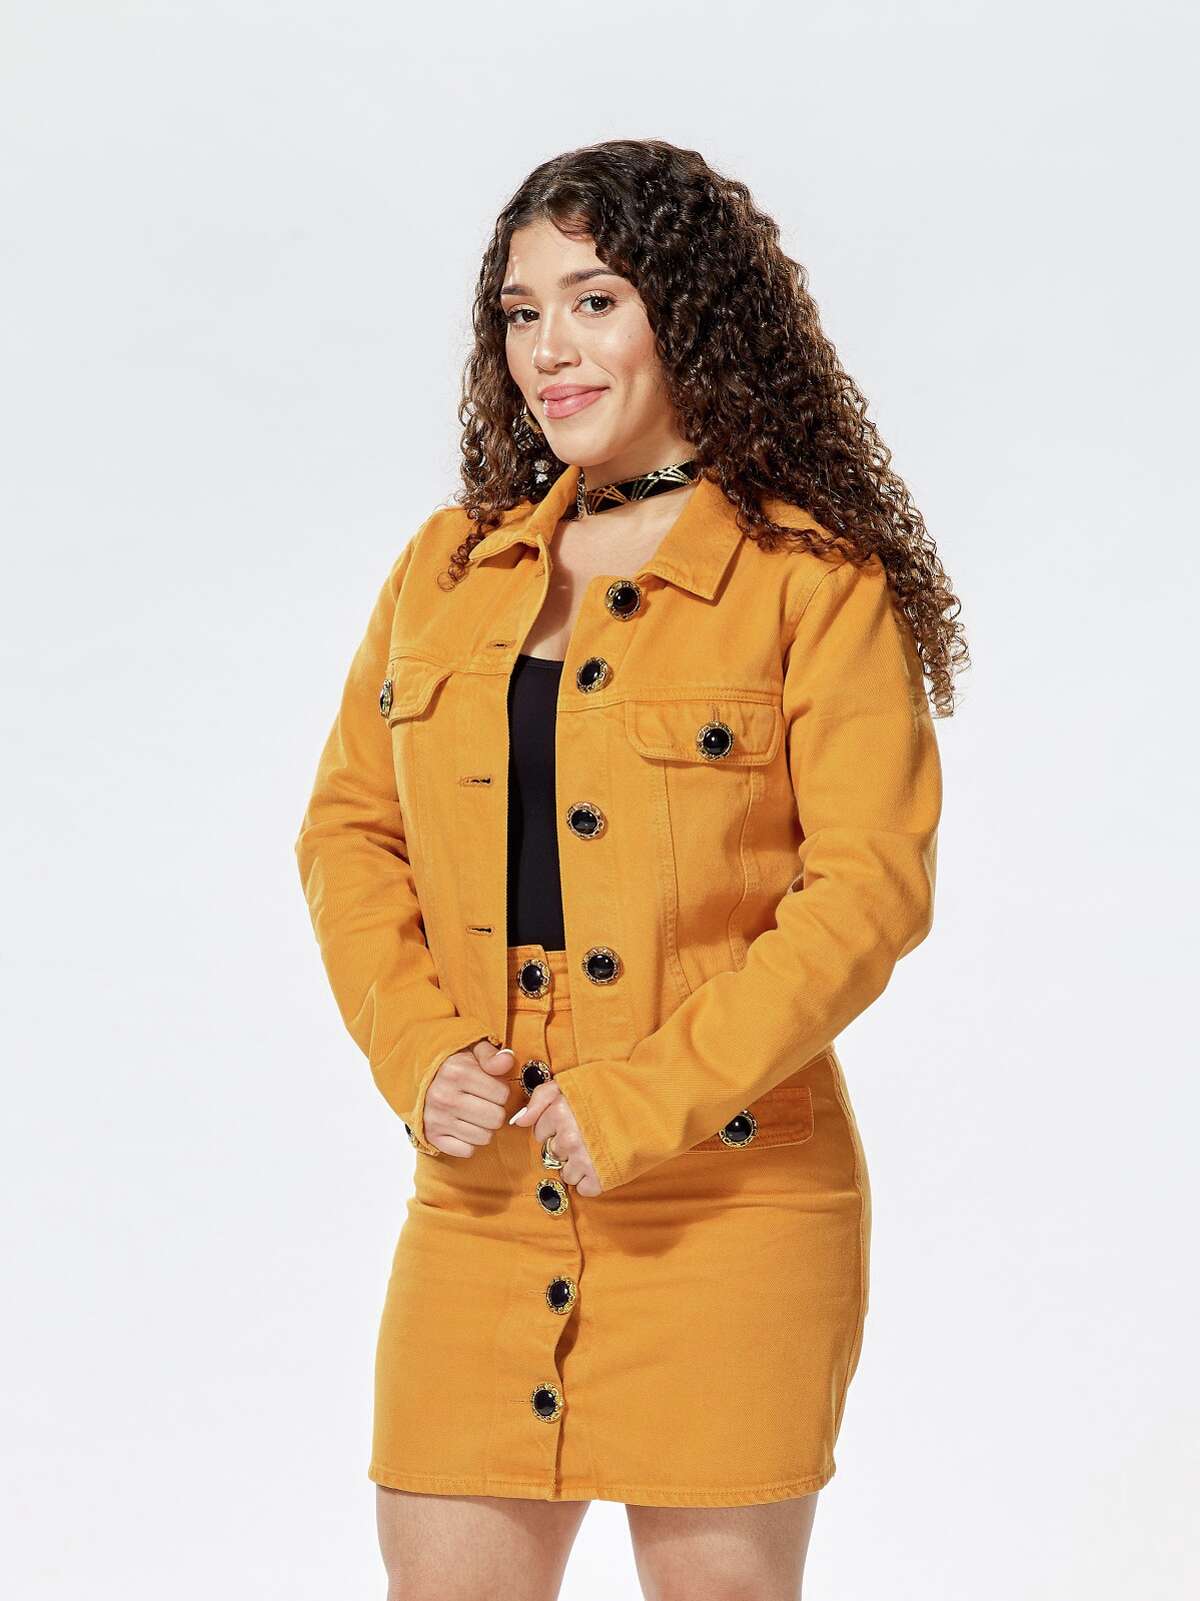 Mandi Castillo, 23, secured a spot on the "The Voice" after singing "Asi Fue" by Juan Gabriel on Monday night's airing.